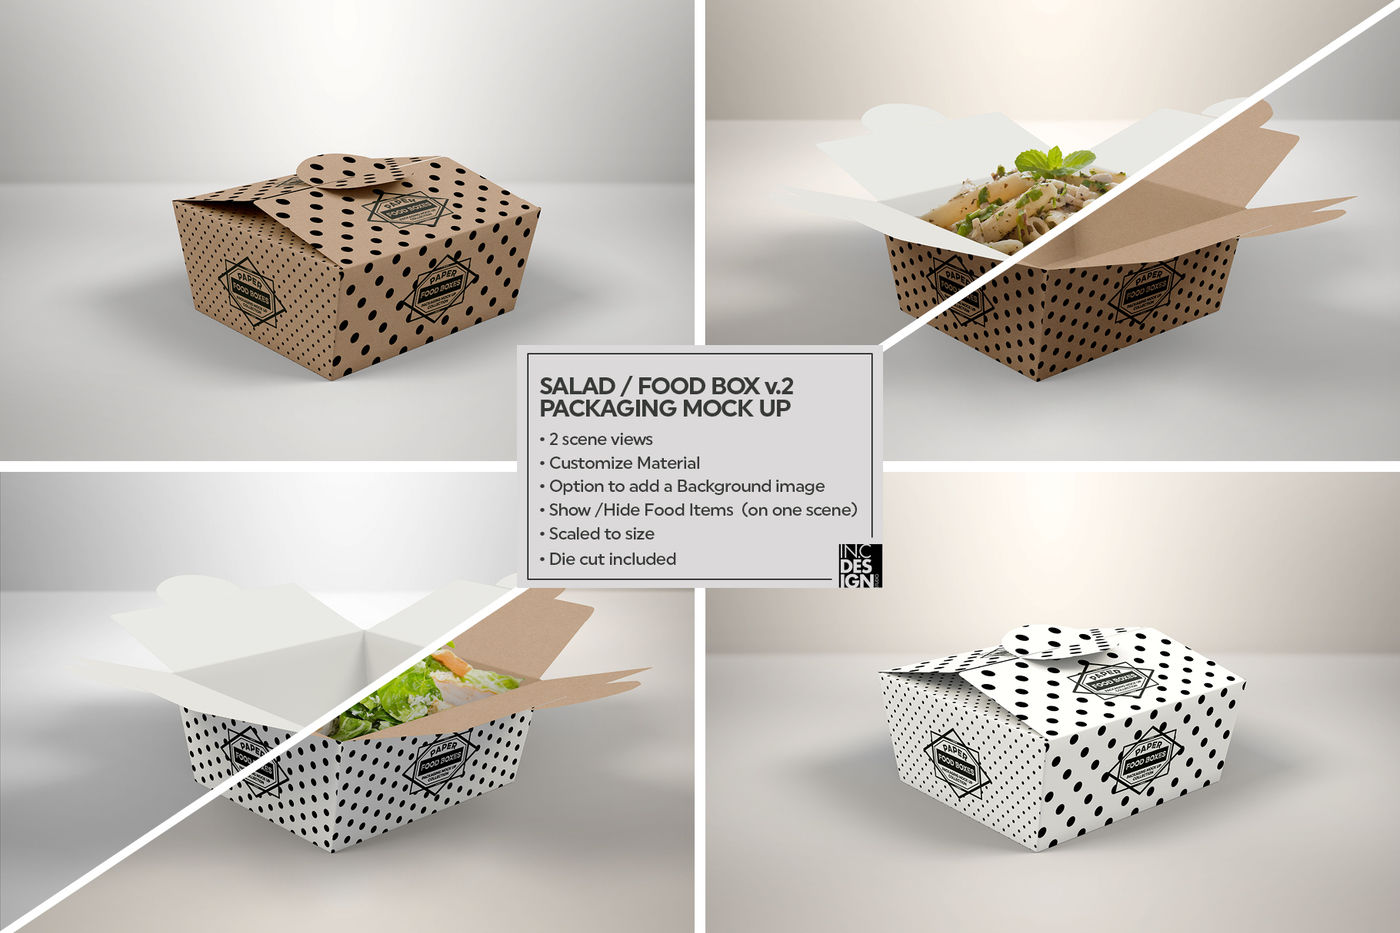 Download VOL 10: Paper Food Box Packaging Mockup Collection By INC ...